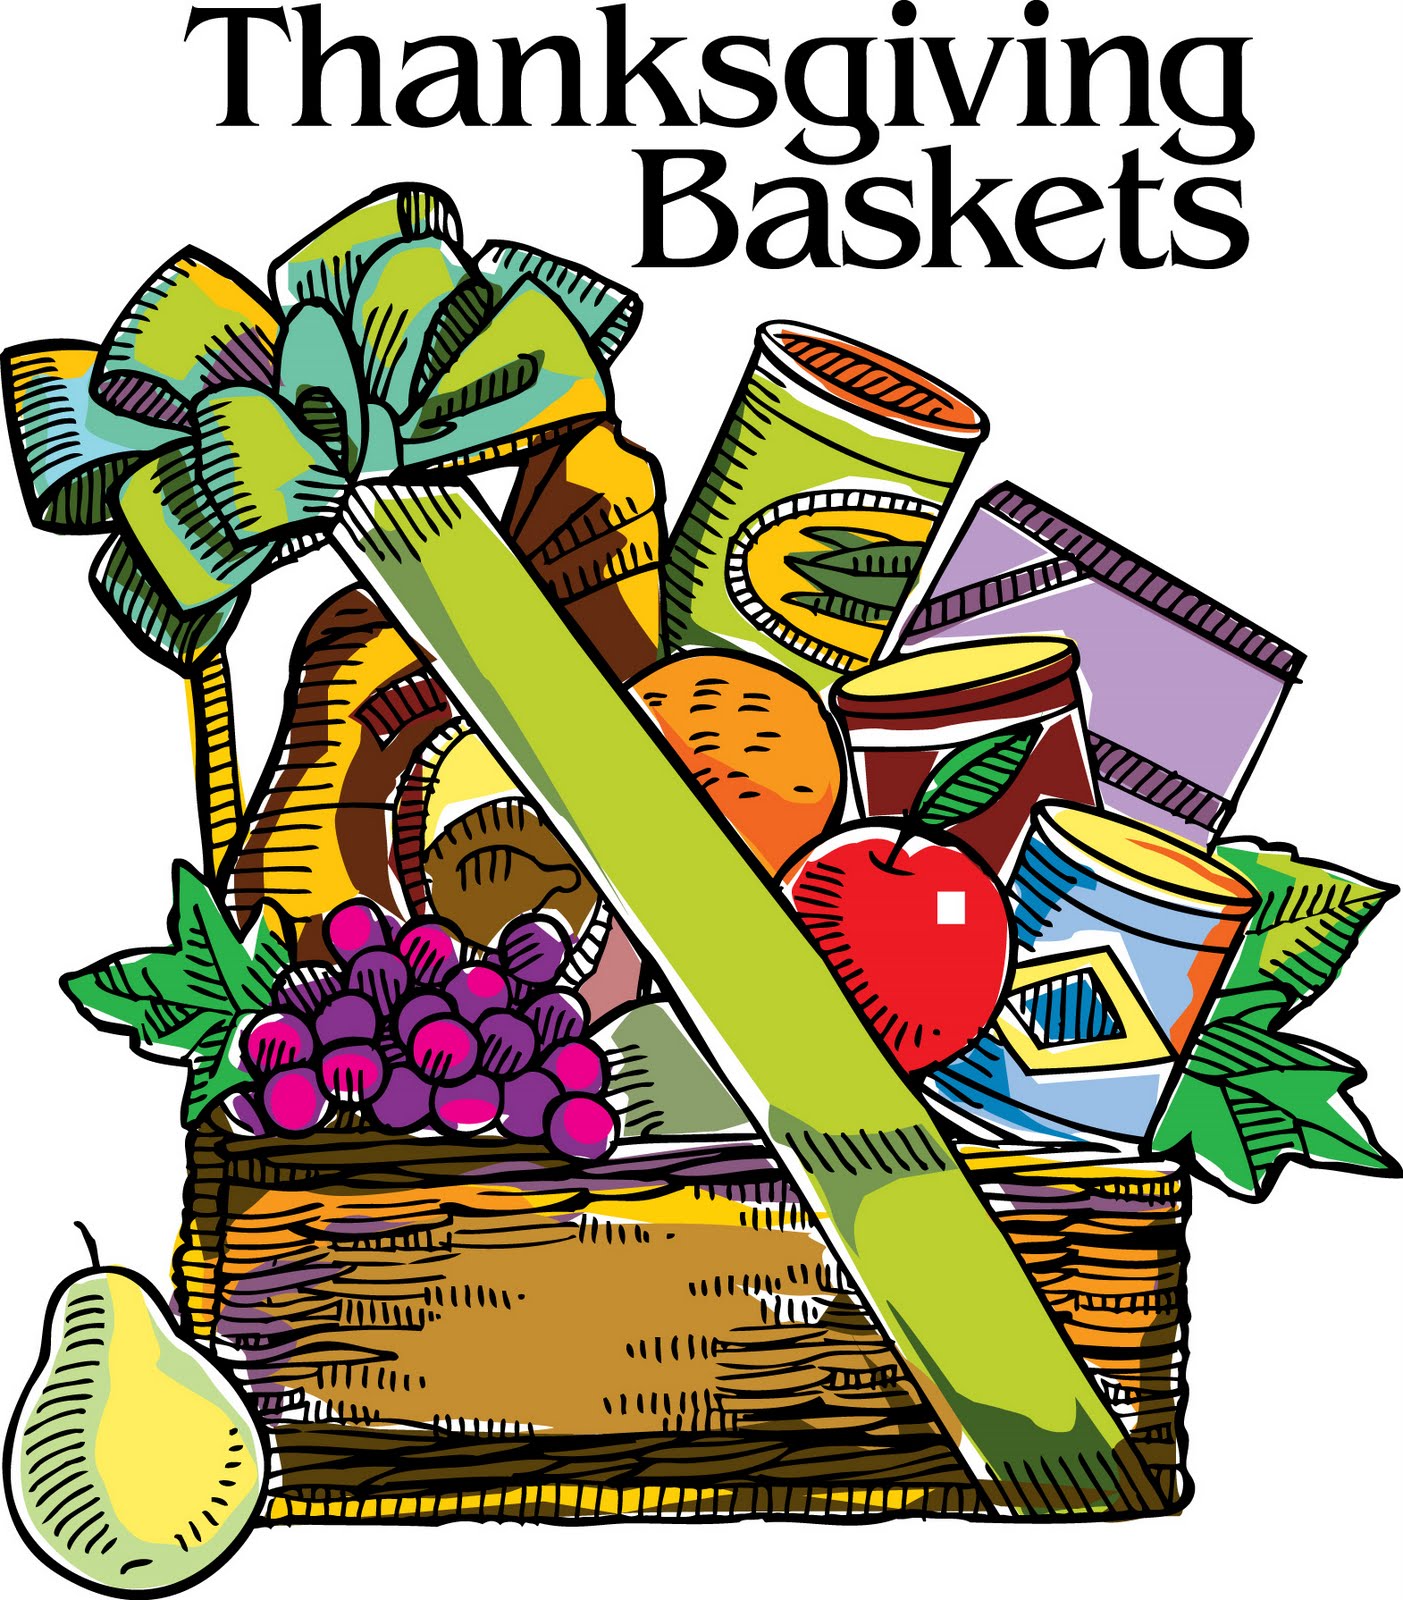 Thanksgiving food drive clipart.